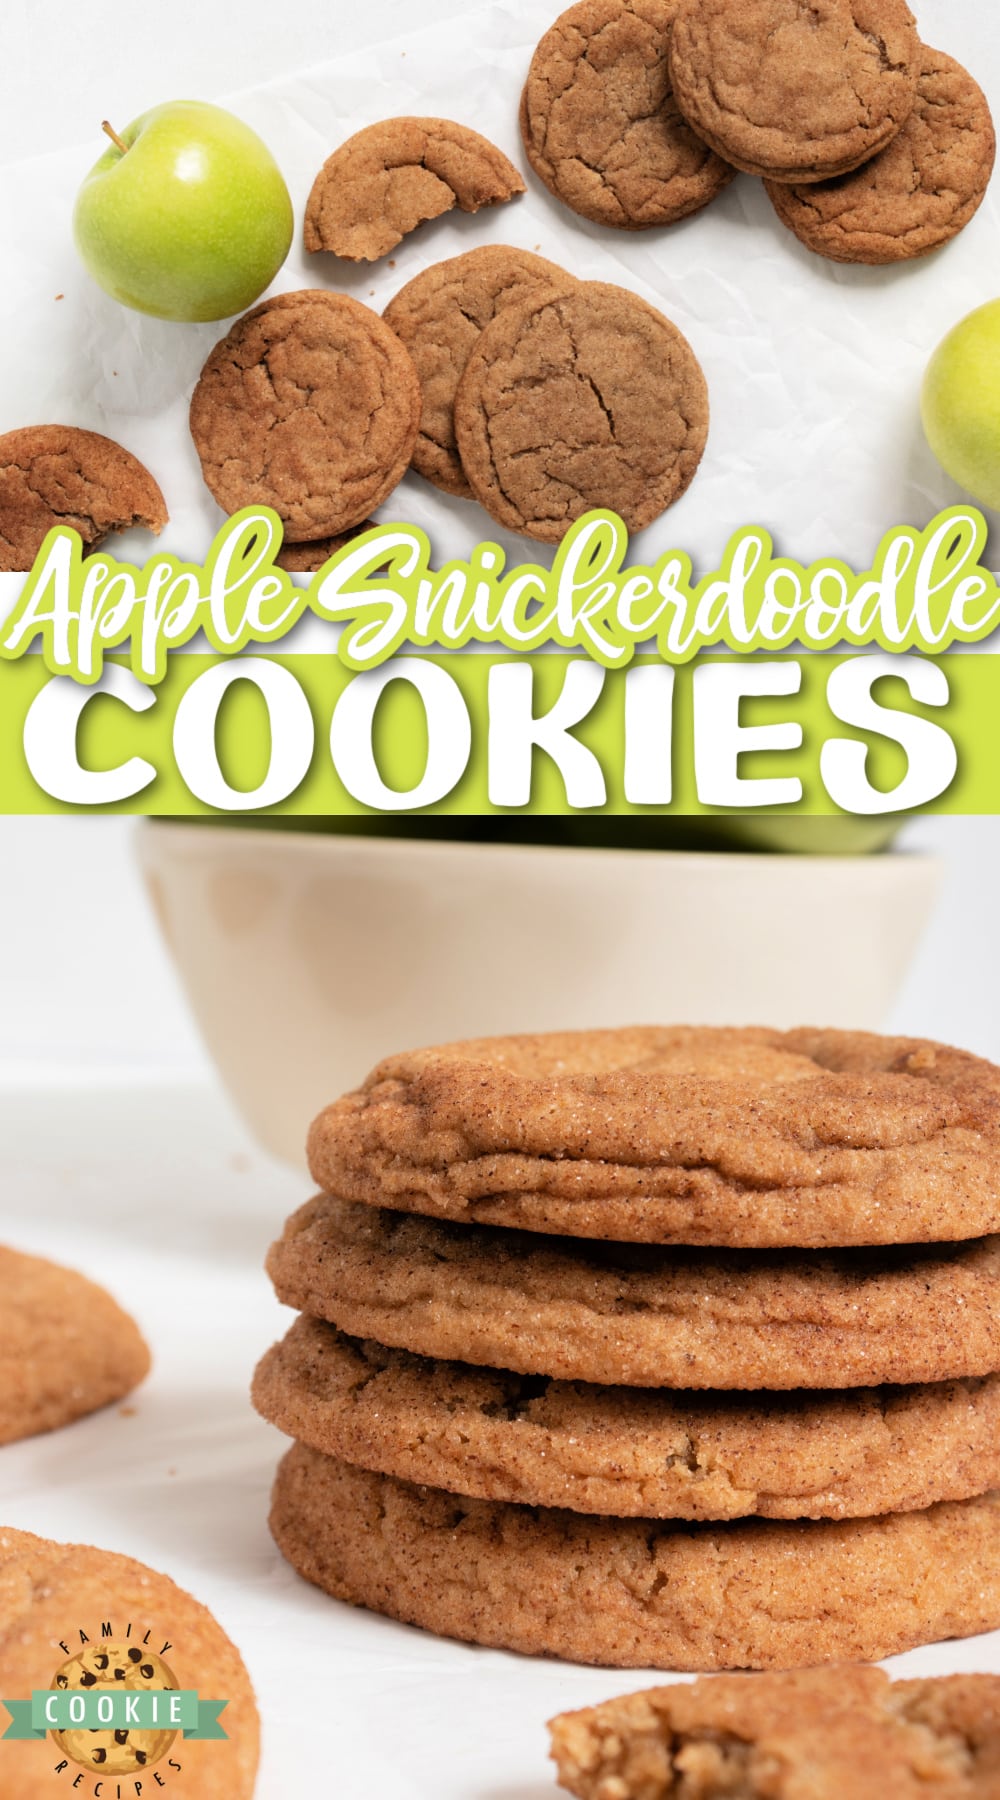 Apple Snickerdoodle Cookies are soft, chewy and full of apple flavor. Made with apple butter and rolled in cinnamon sugar for an irresistible cookie that’s perfect for the fall!